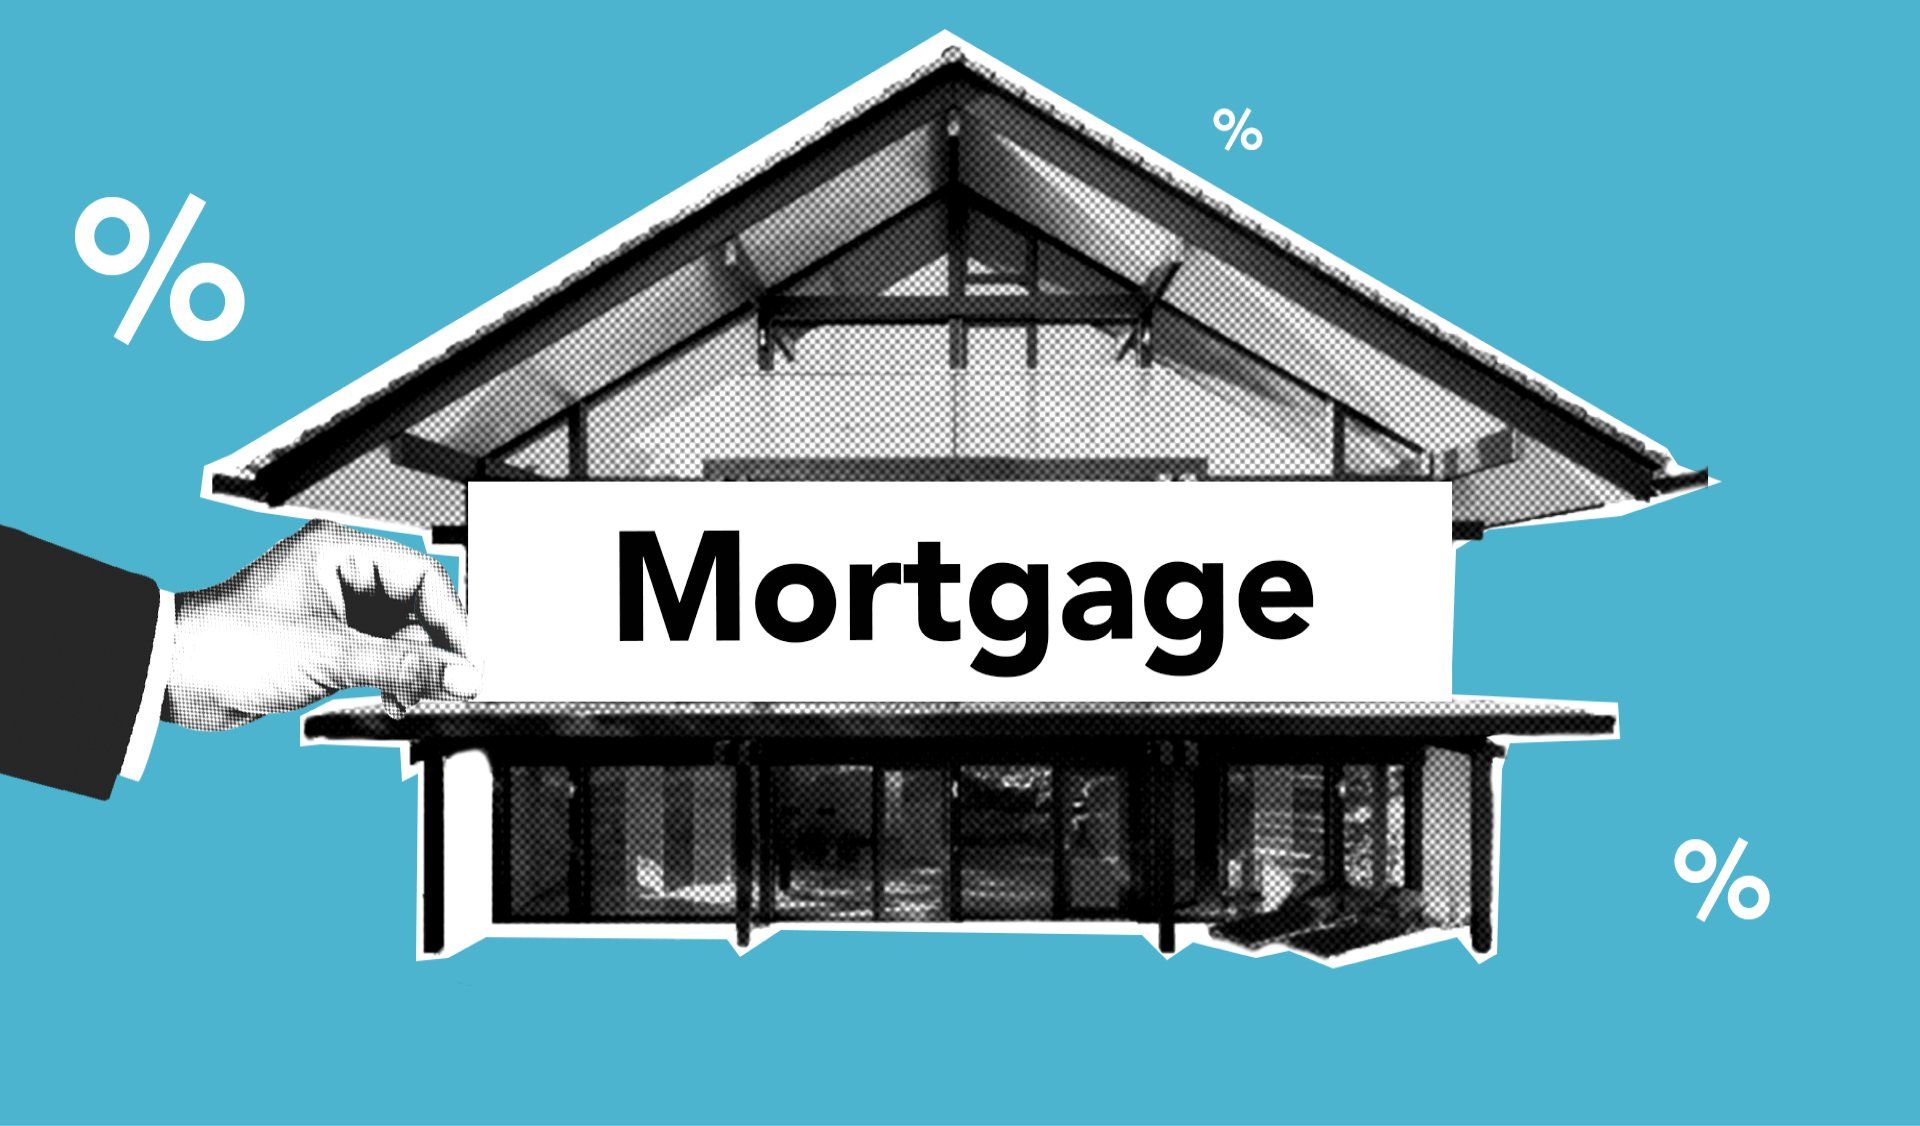 Second mortgage